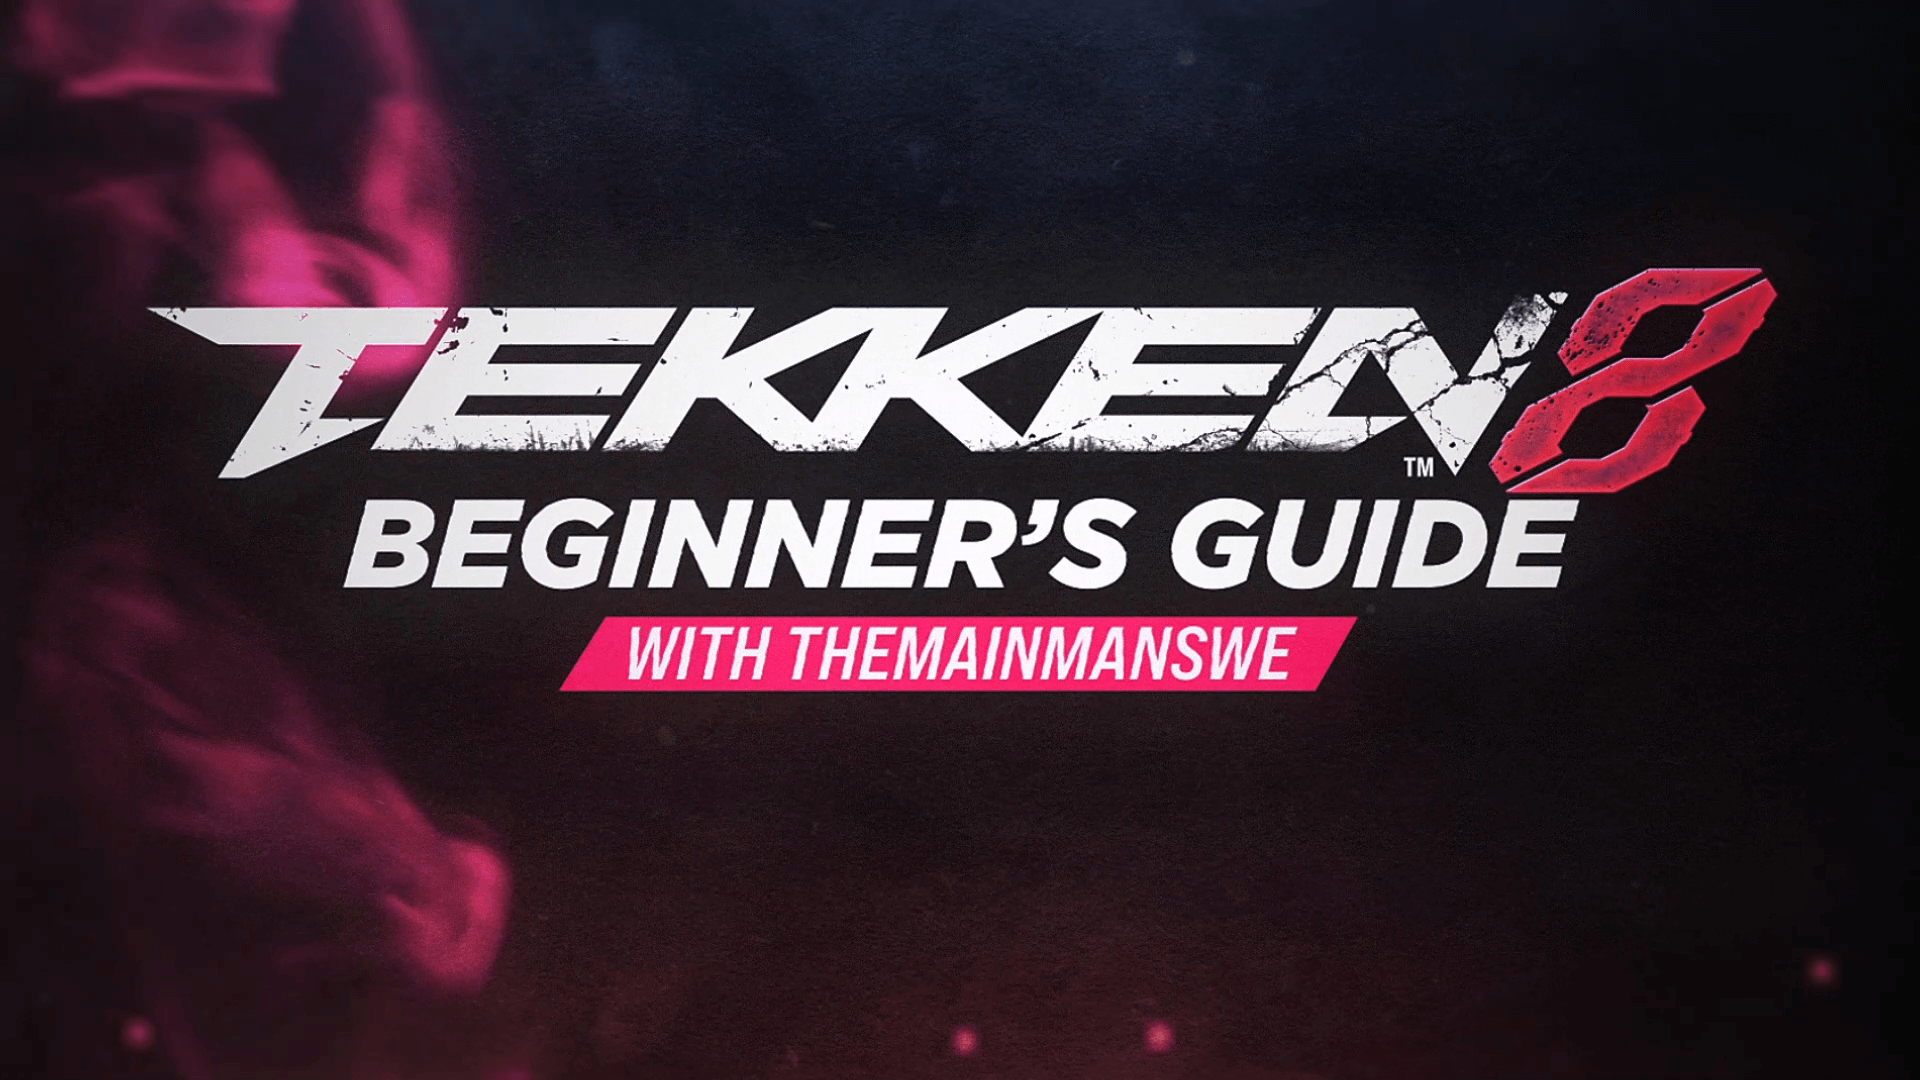 Bandai Namco & TheMainManSWE Release an Official T8 Beginner's Guide